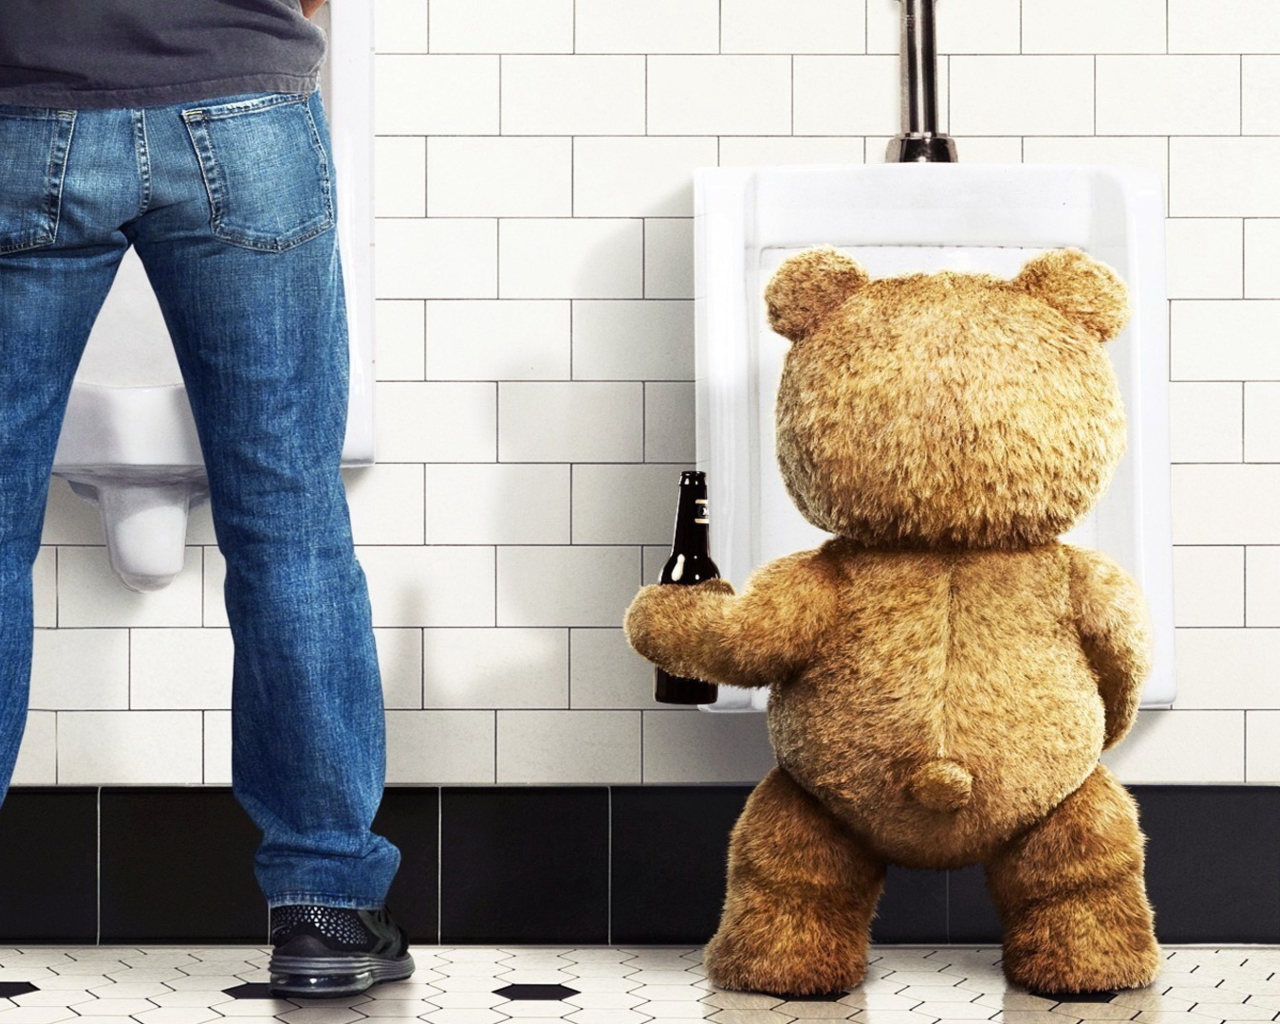 Ted Poster wallpaper 1280x1024